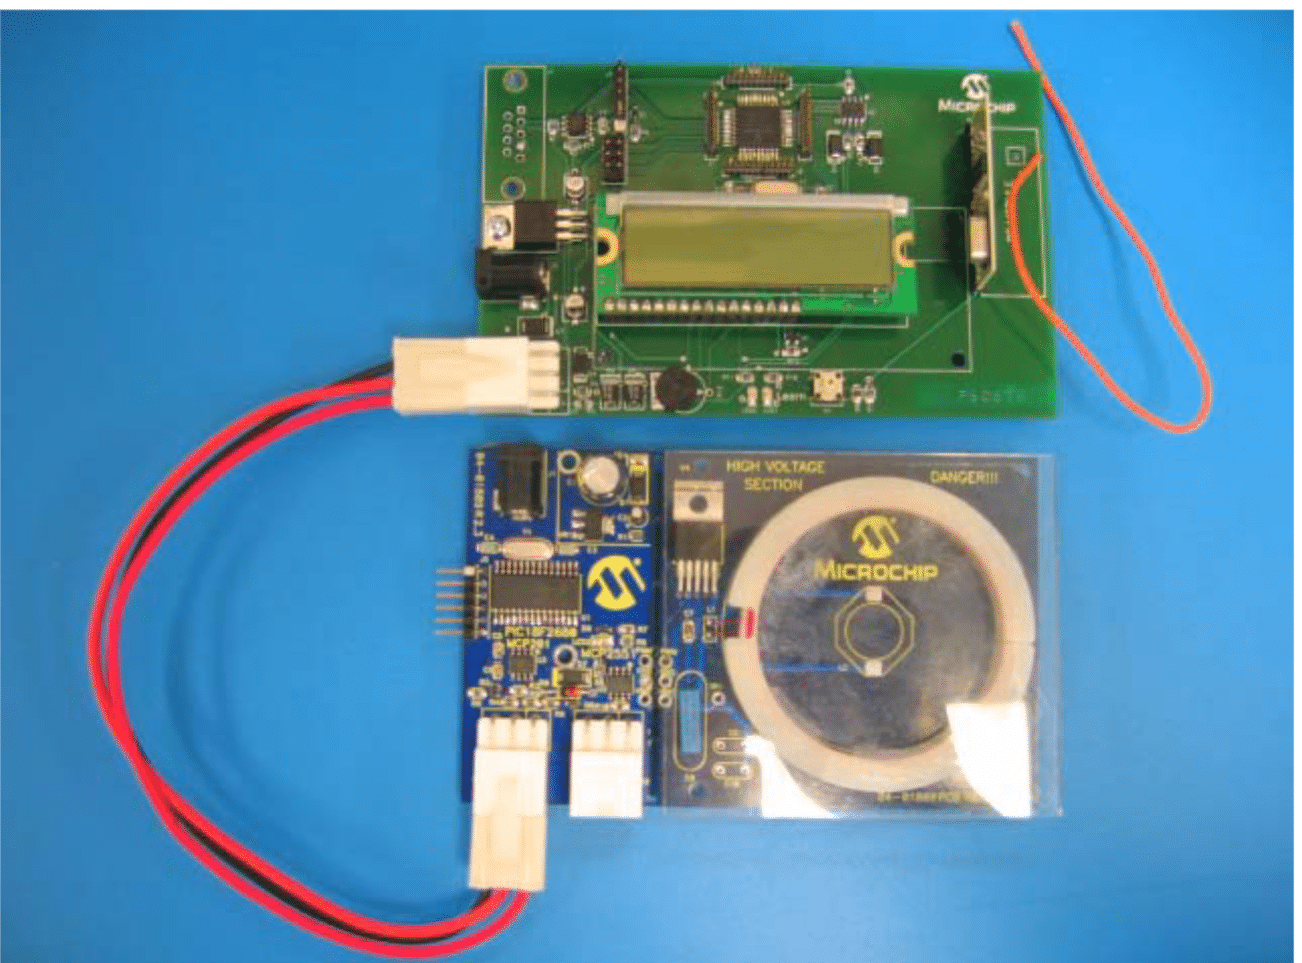 Tire Pressure Monitoring System Reference Design